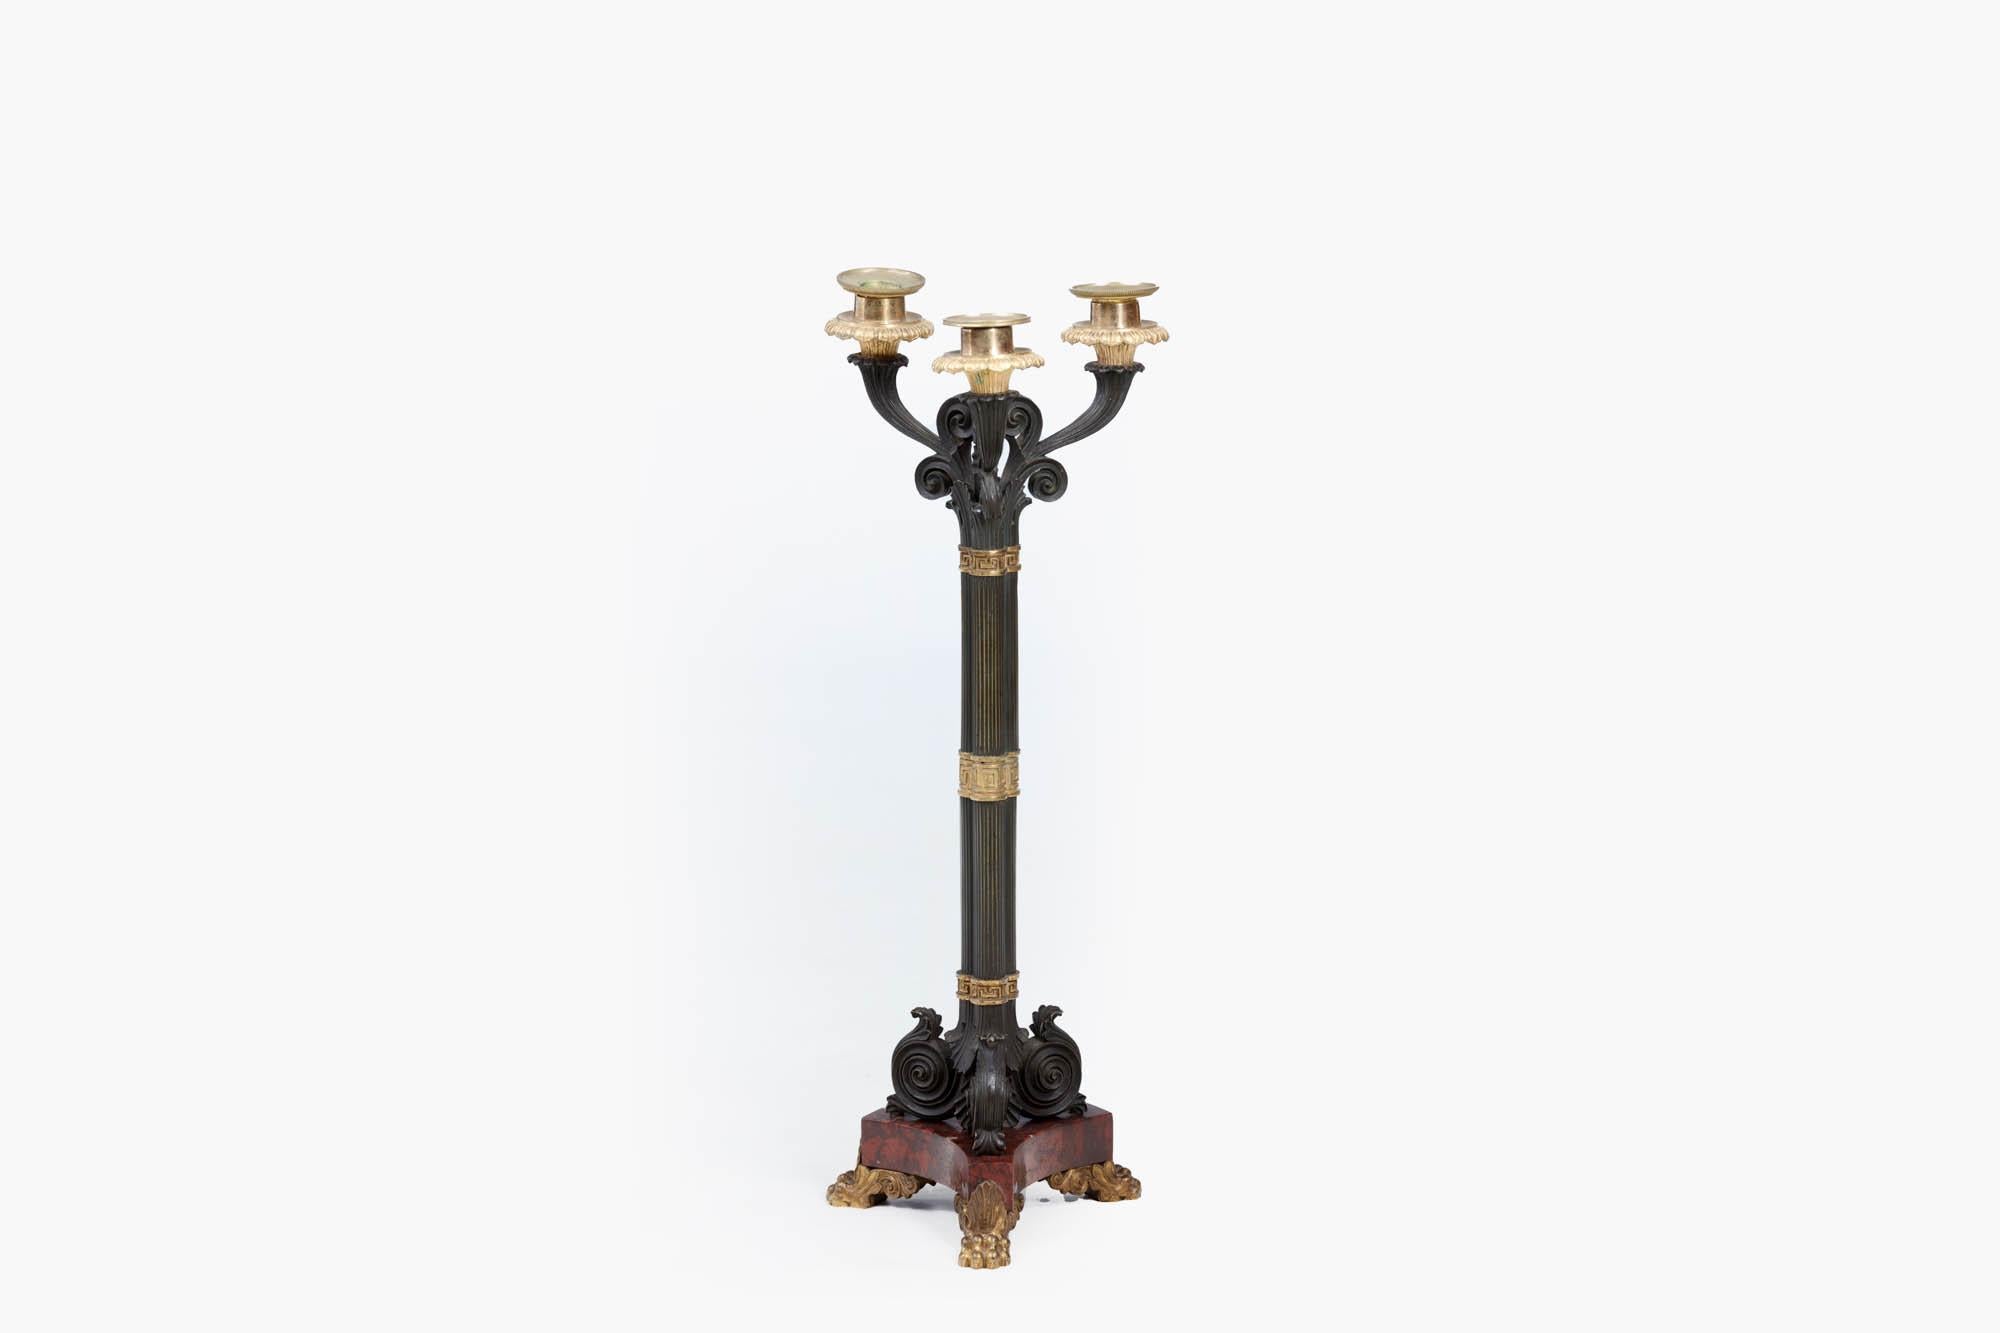 19th century pair of Regency bronze three light candlesticks, in the Classical style, patinated with gilt highlights, and featuring Greek cut key banding. The reeded naturalistic pillars rise upwards to the three branches of the candelabra with